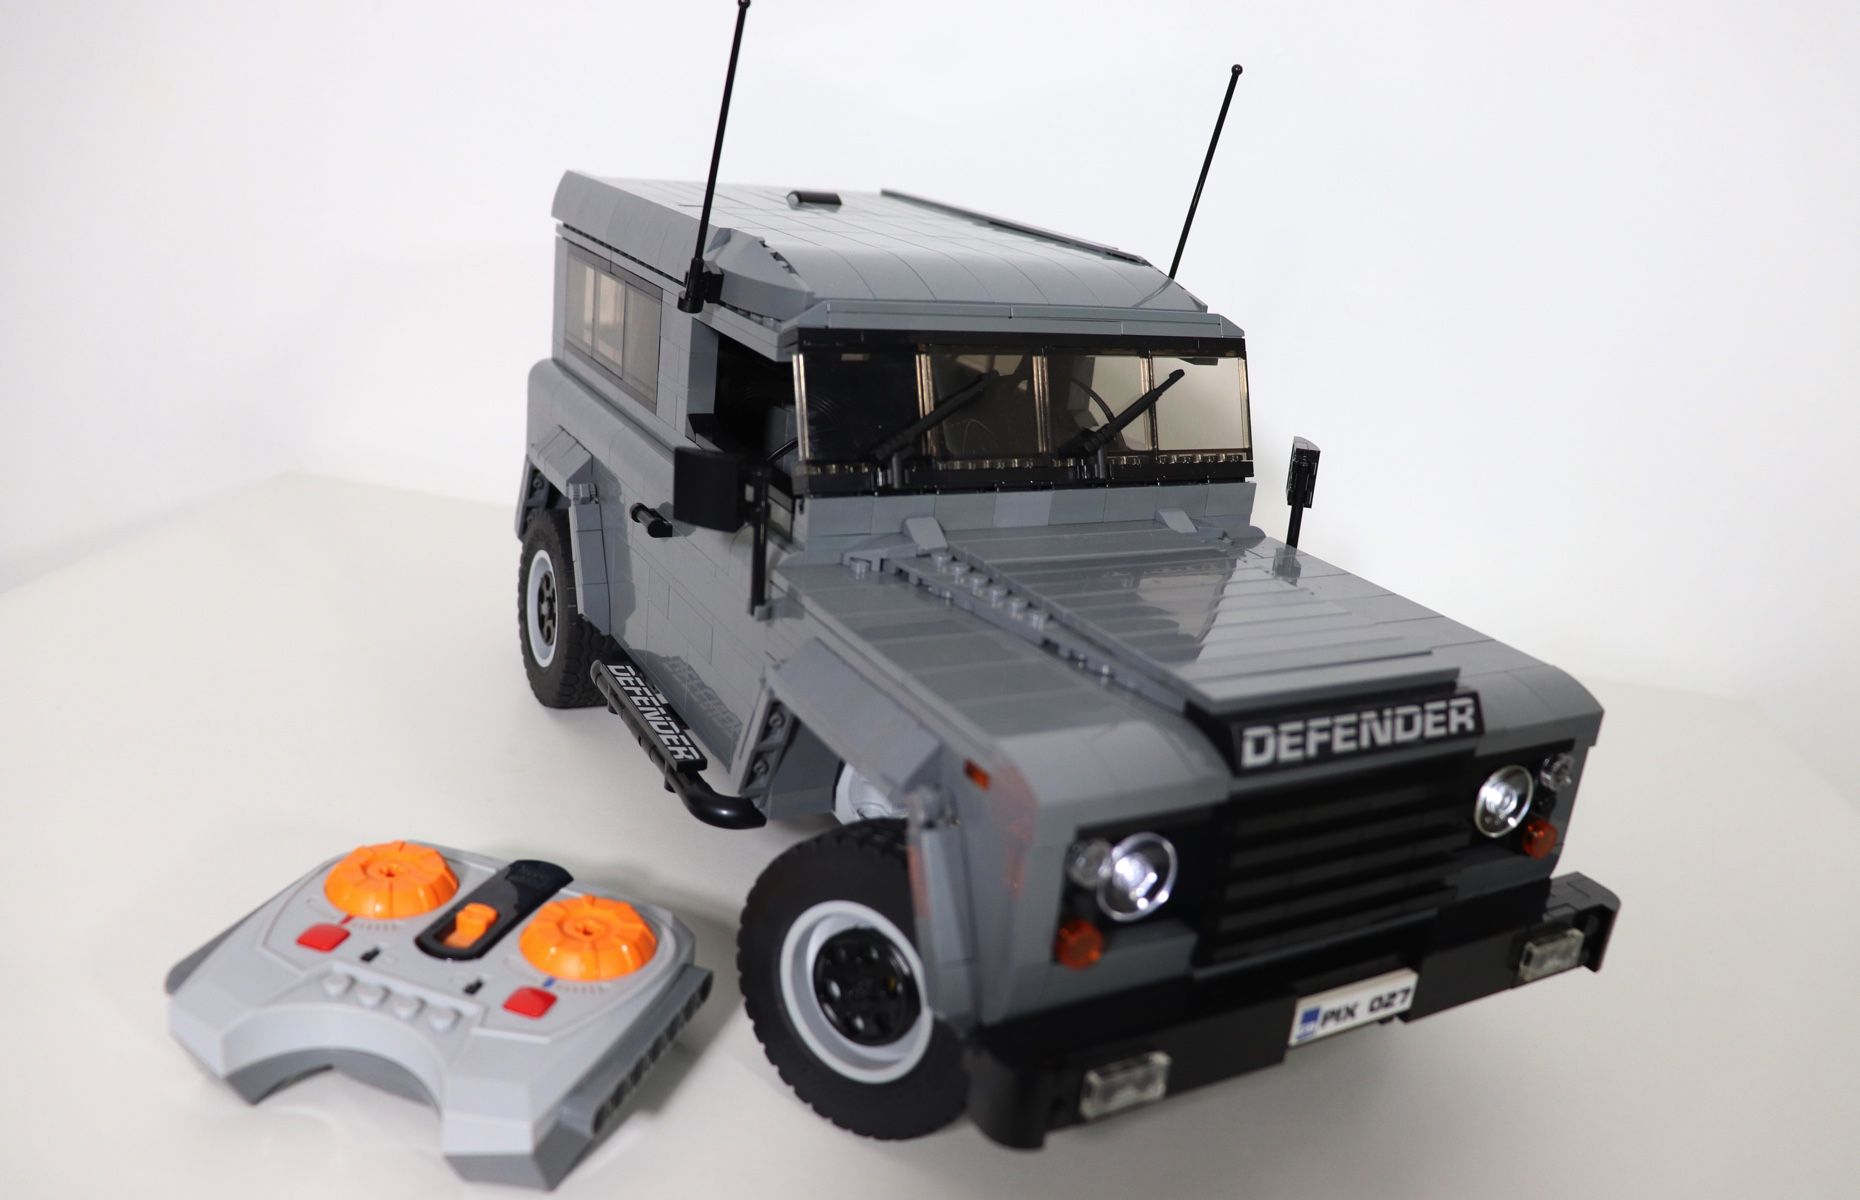 You know you want this remote-controlled Lego Land Rover Defender